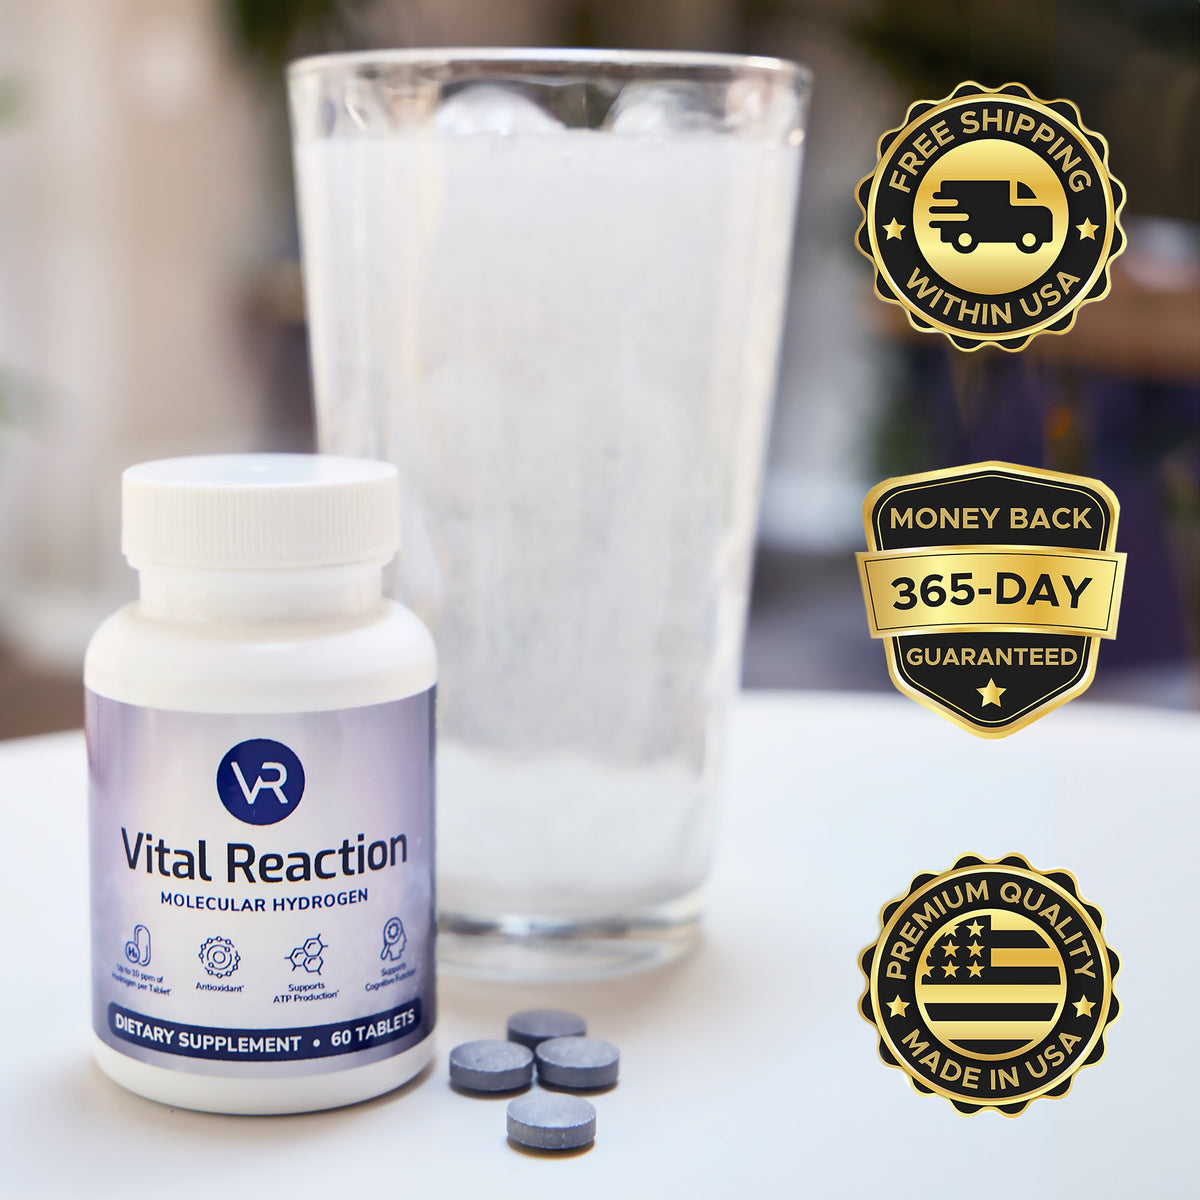 vital reaction molecular hydrogen tablets, a glass with a dissolving tablet, and badges for free shipping, money back guarantee, and made in usa